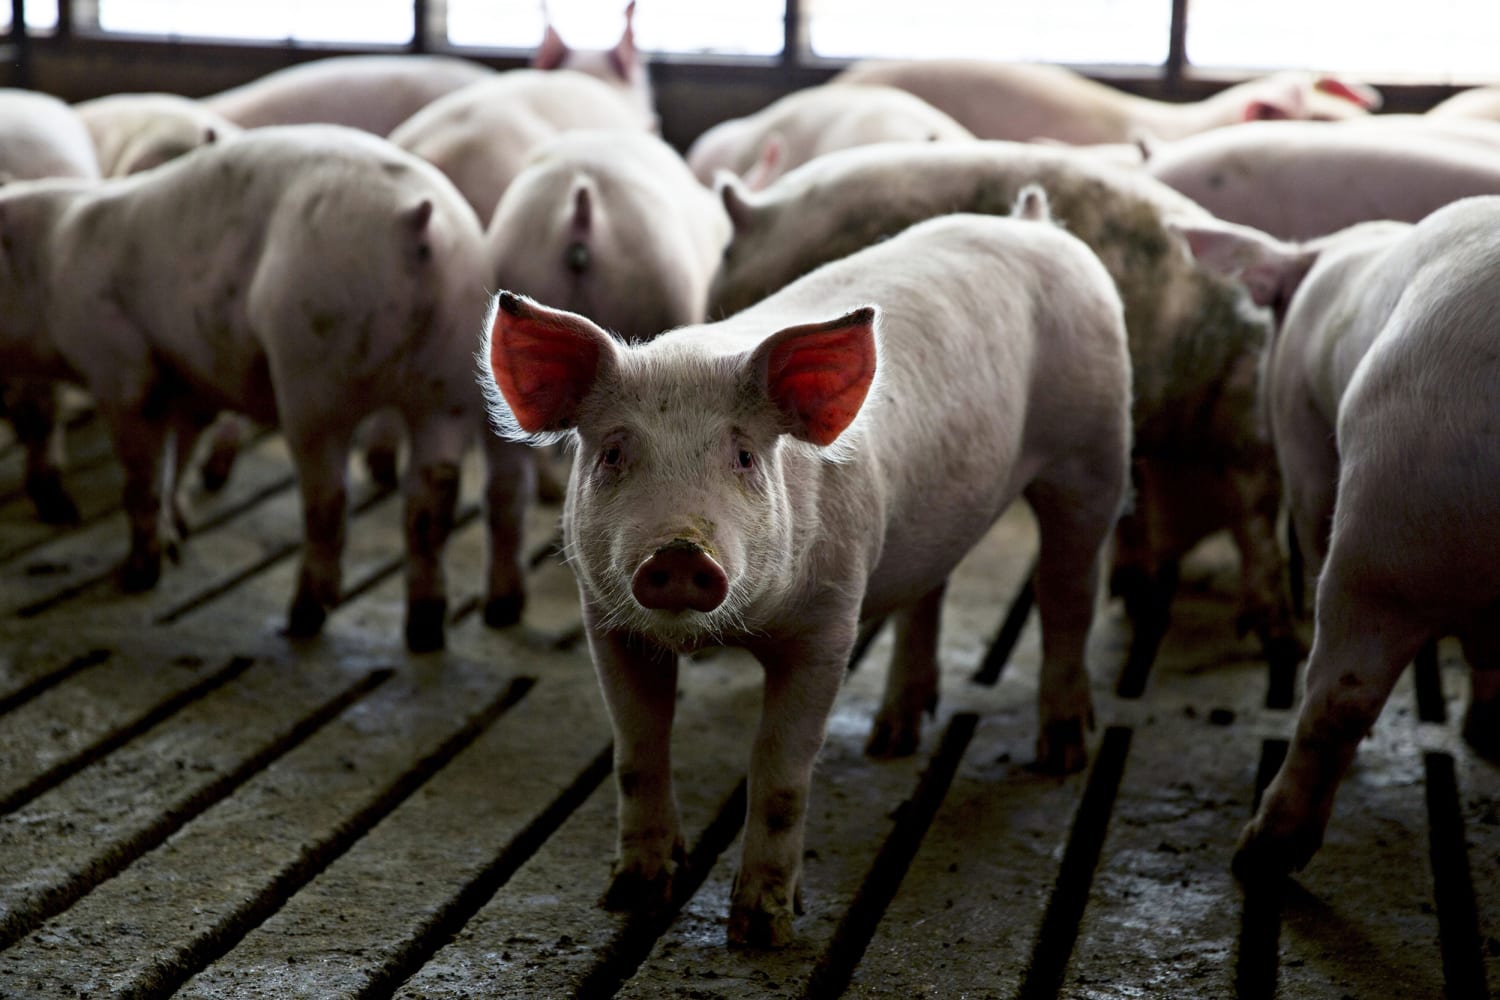 Bacon may disappear in California as pig rules take effect